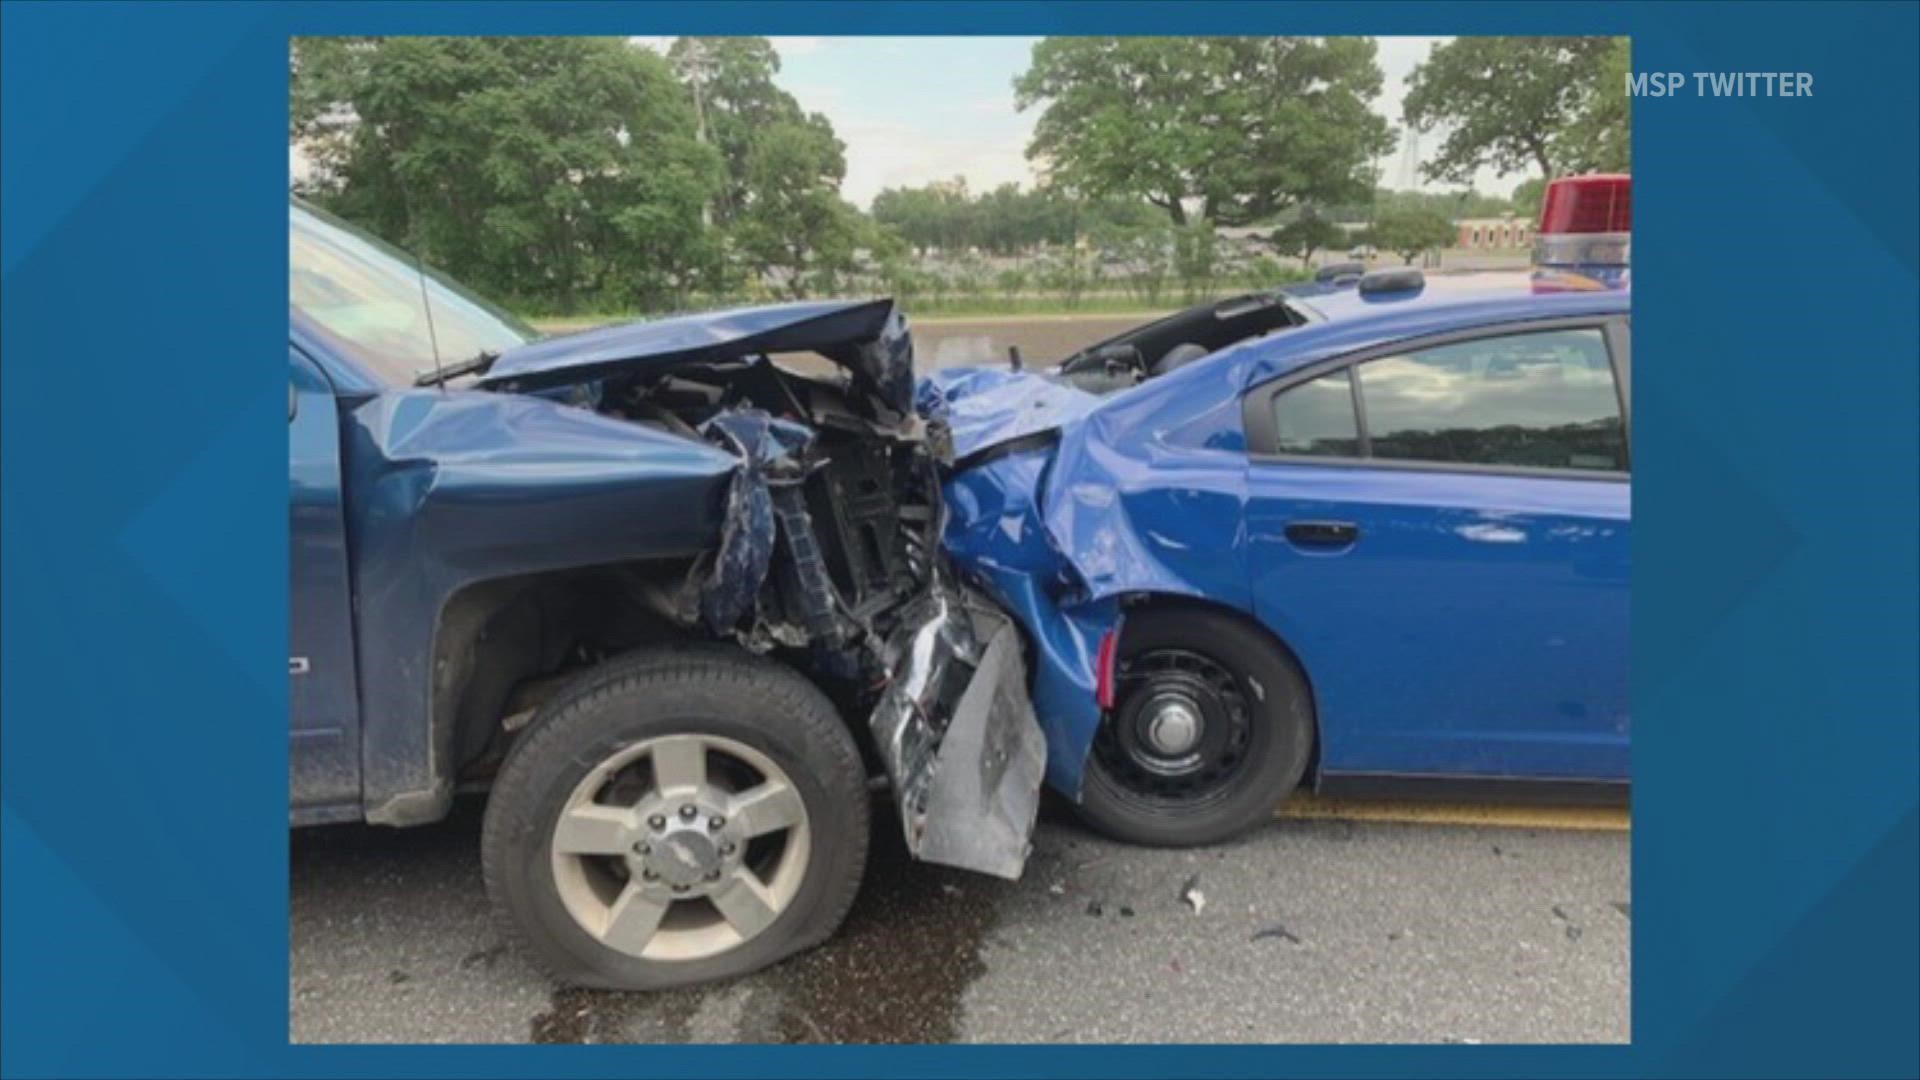 A Michigan State Police car was rear ended during a traffic stop, causing two more accidents on US-131.